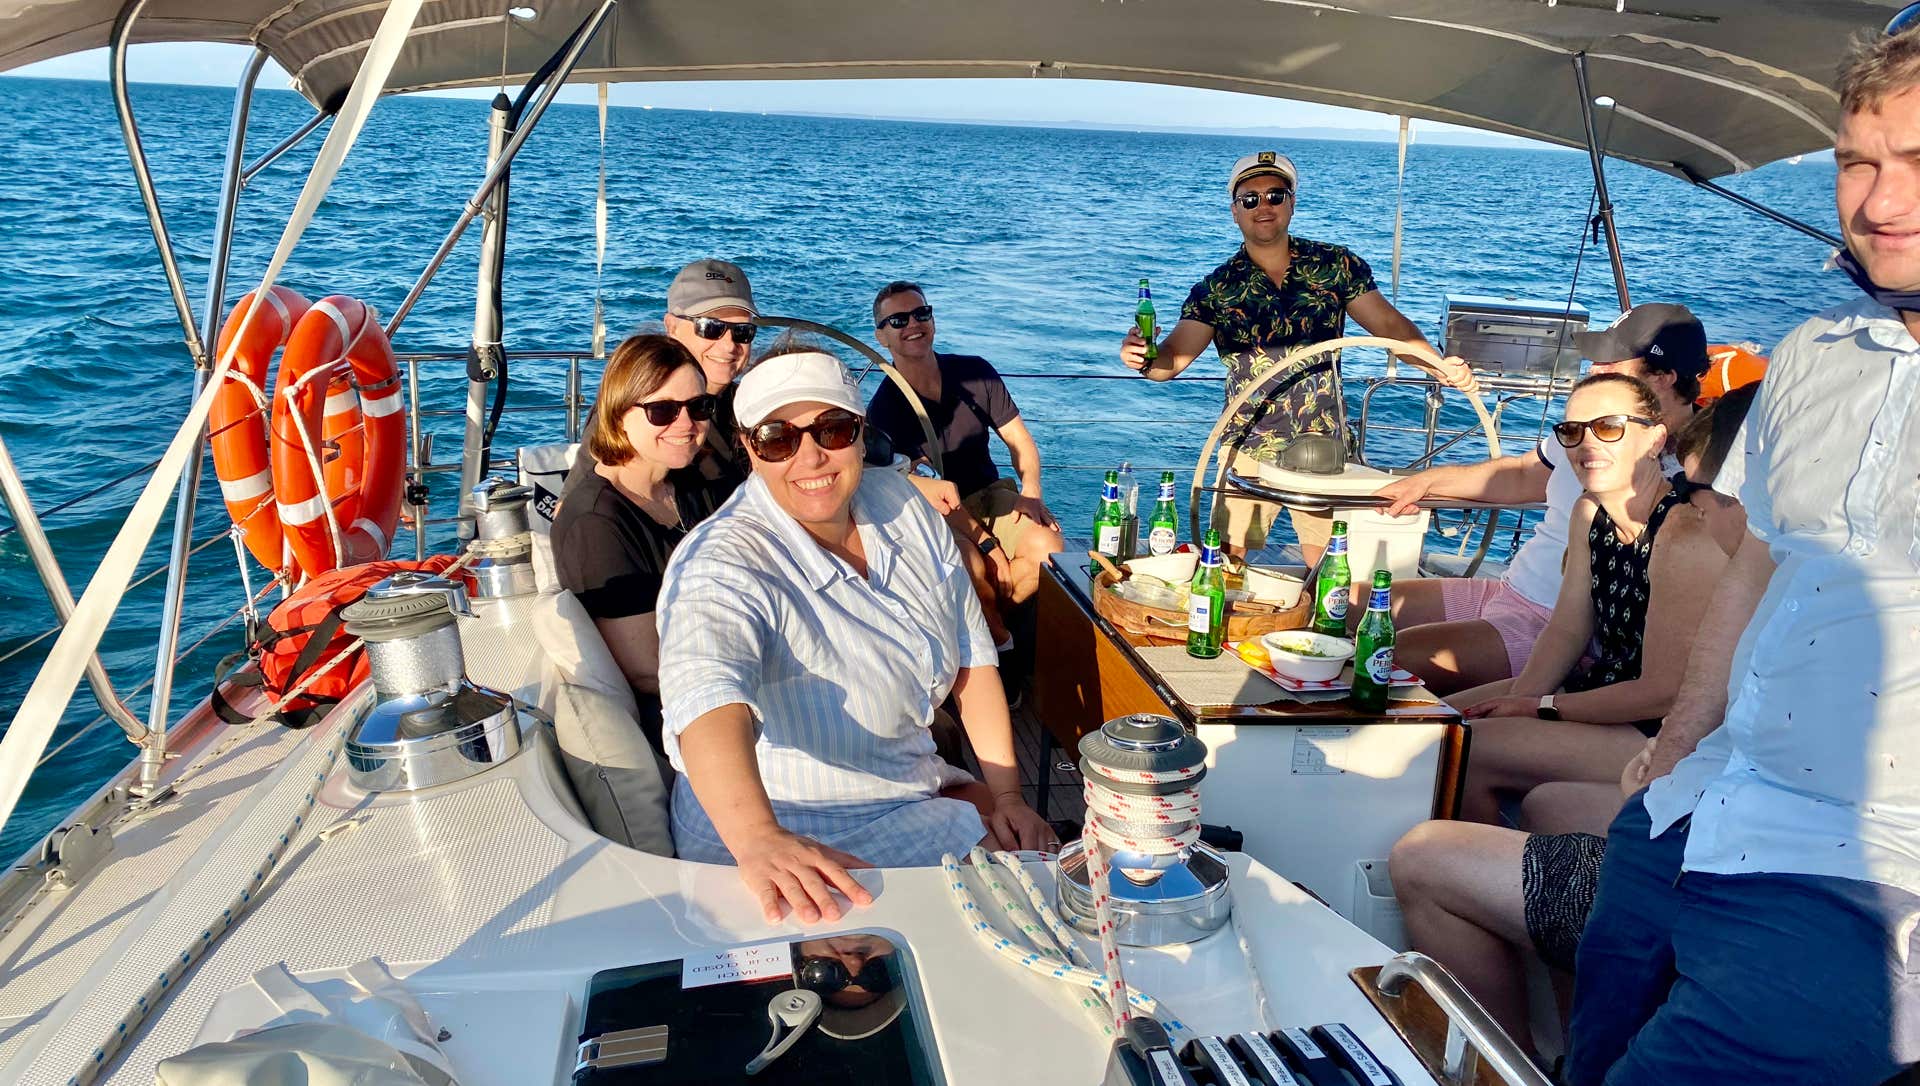 Employees enjoying a social yacht race against another work team on a private yacht charter in Moreton Bay, Brisbane